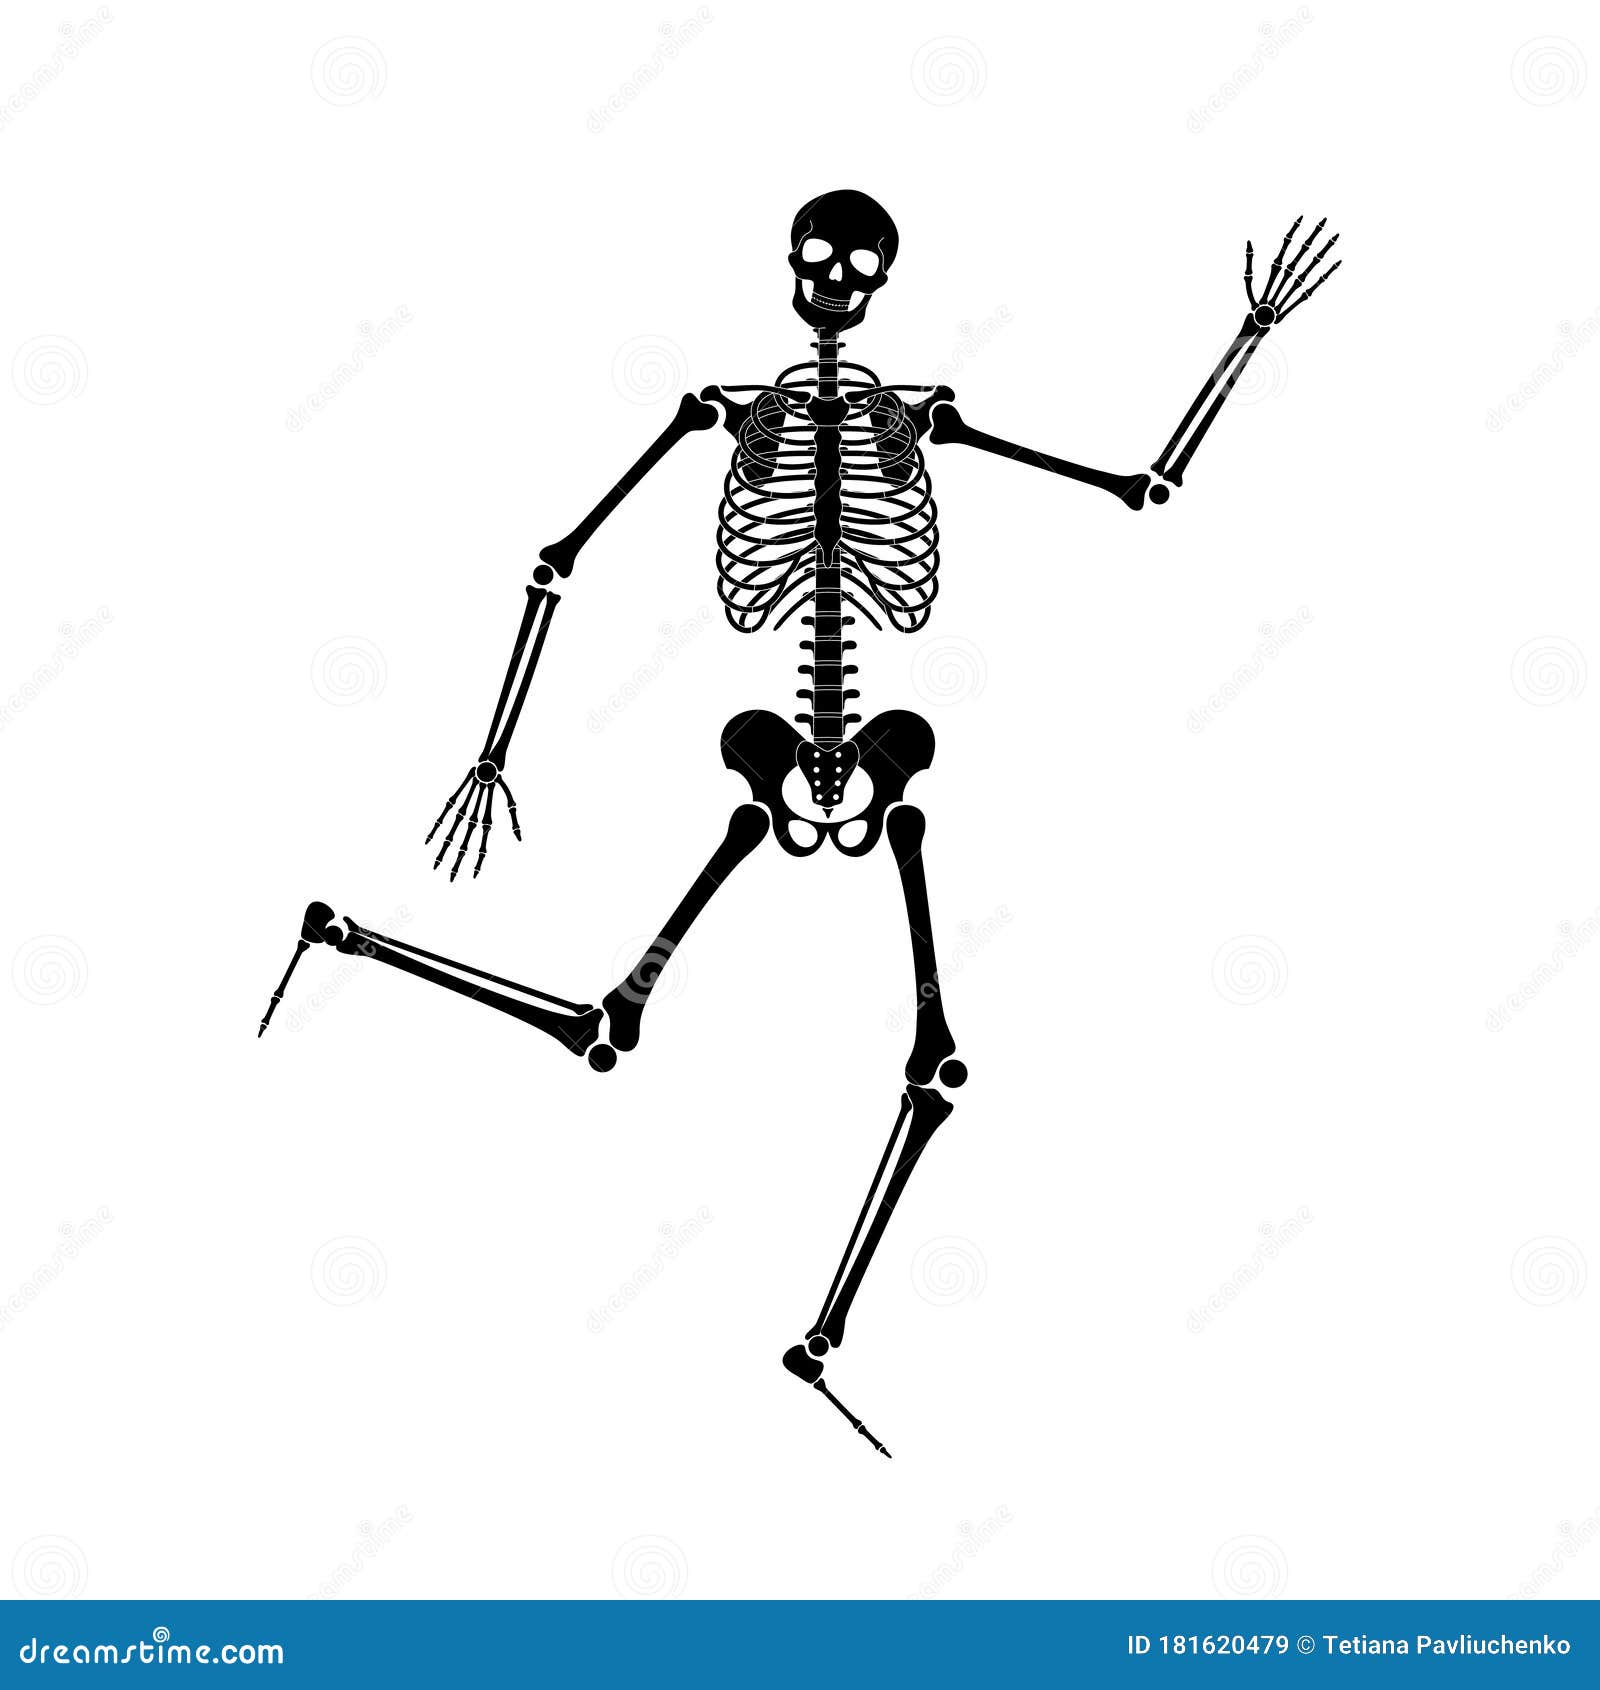 Happy Dancing Skeletons on Halloween Stock Vector - Illustration of gothic,  funny: 181620479